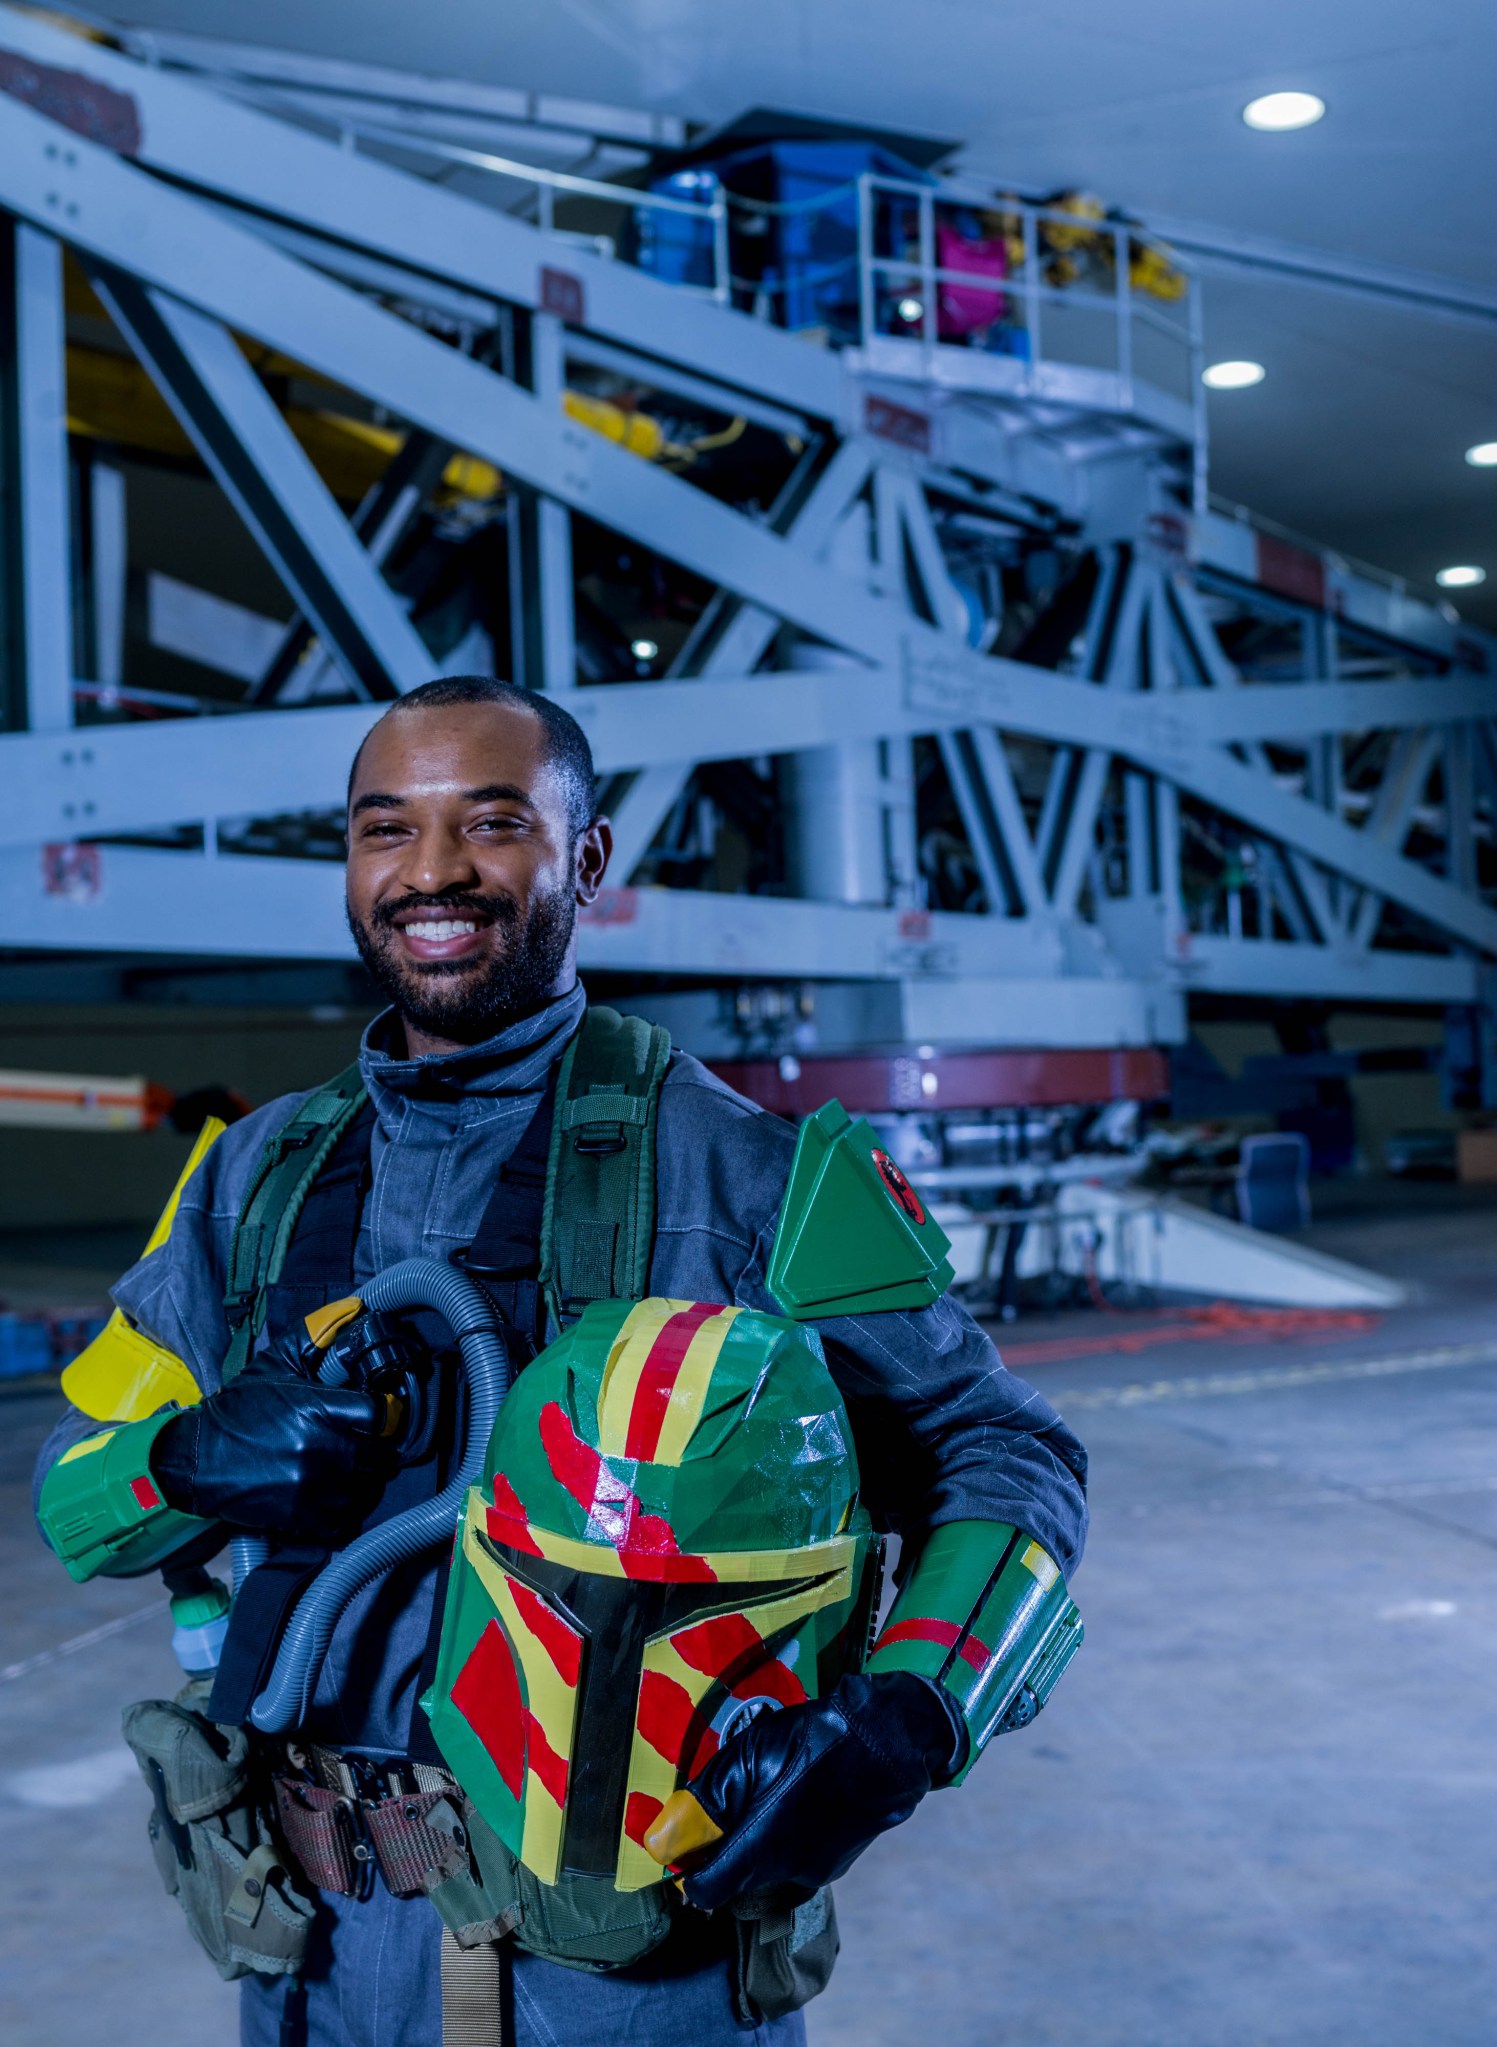 A man in a colorful Star Wars-style Mandalorian costume smiles and poses in front of Goddard's centrifuge, a huge room with a horizontal metal framework in the center.